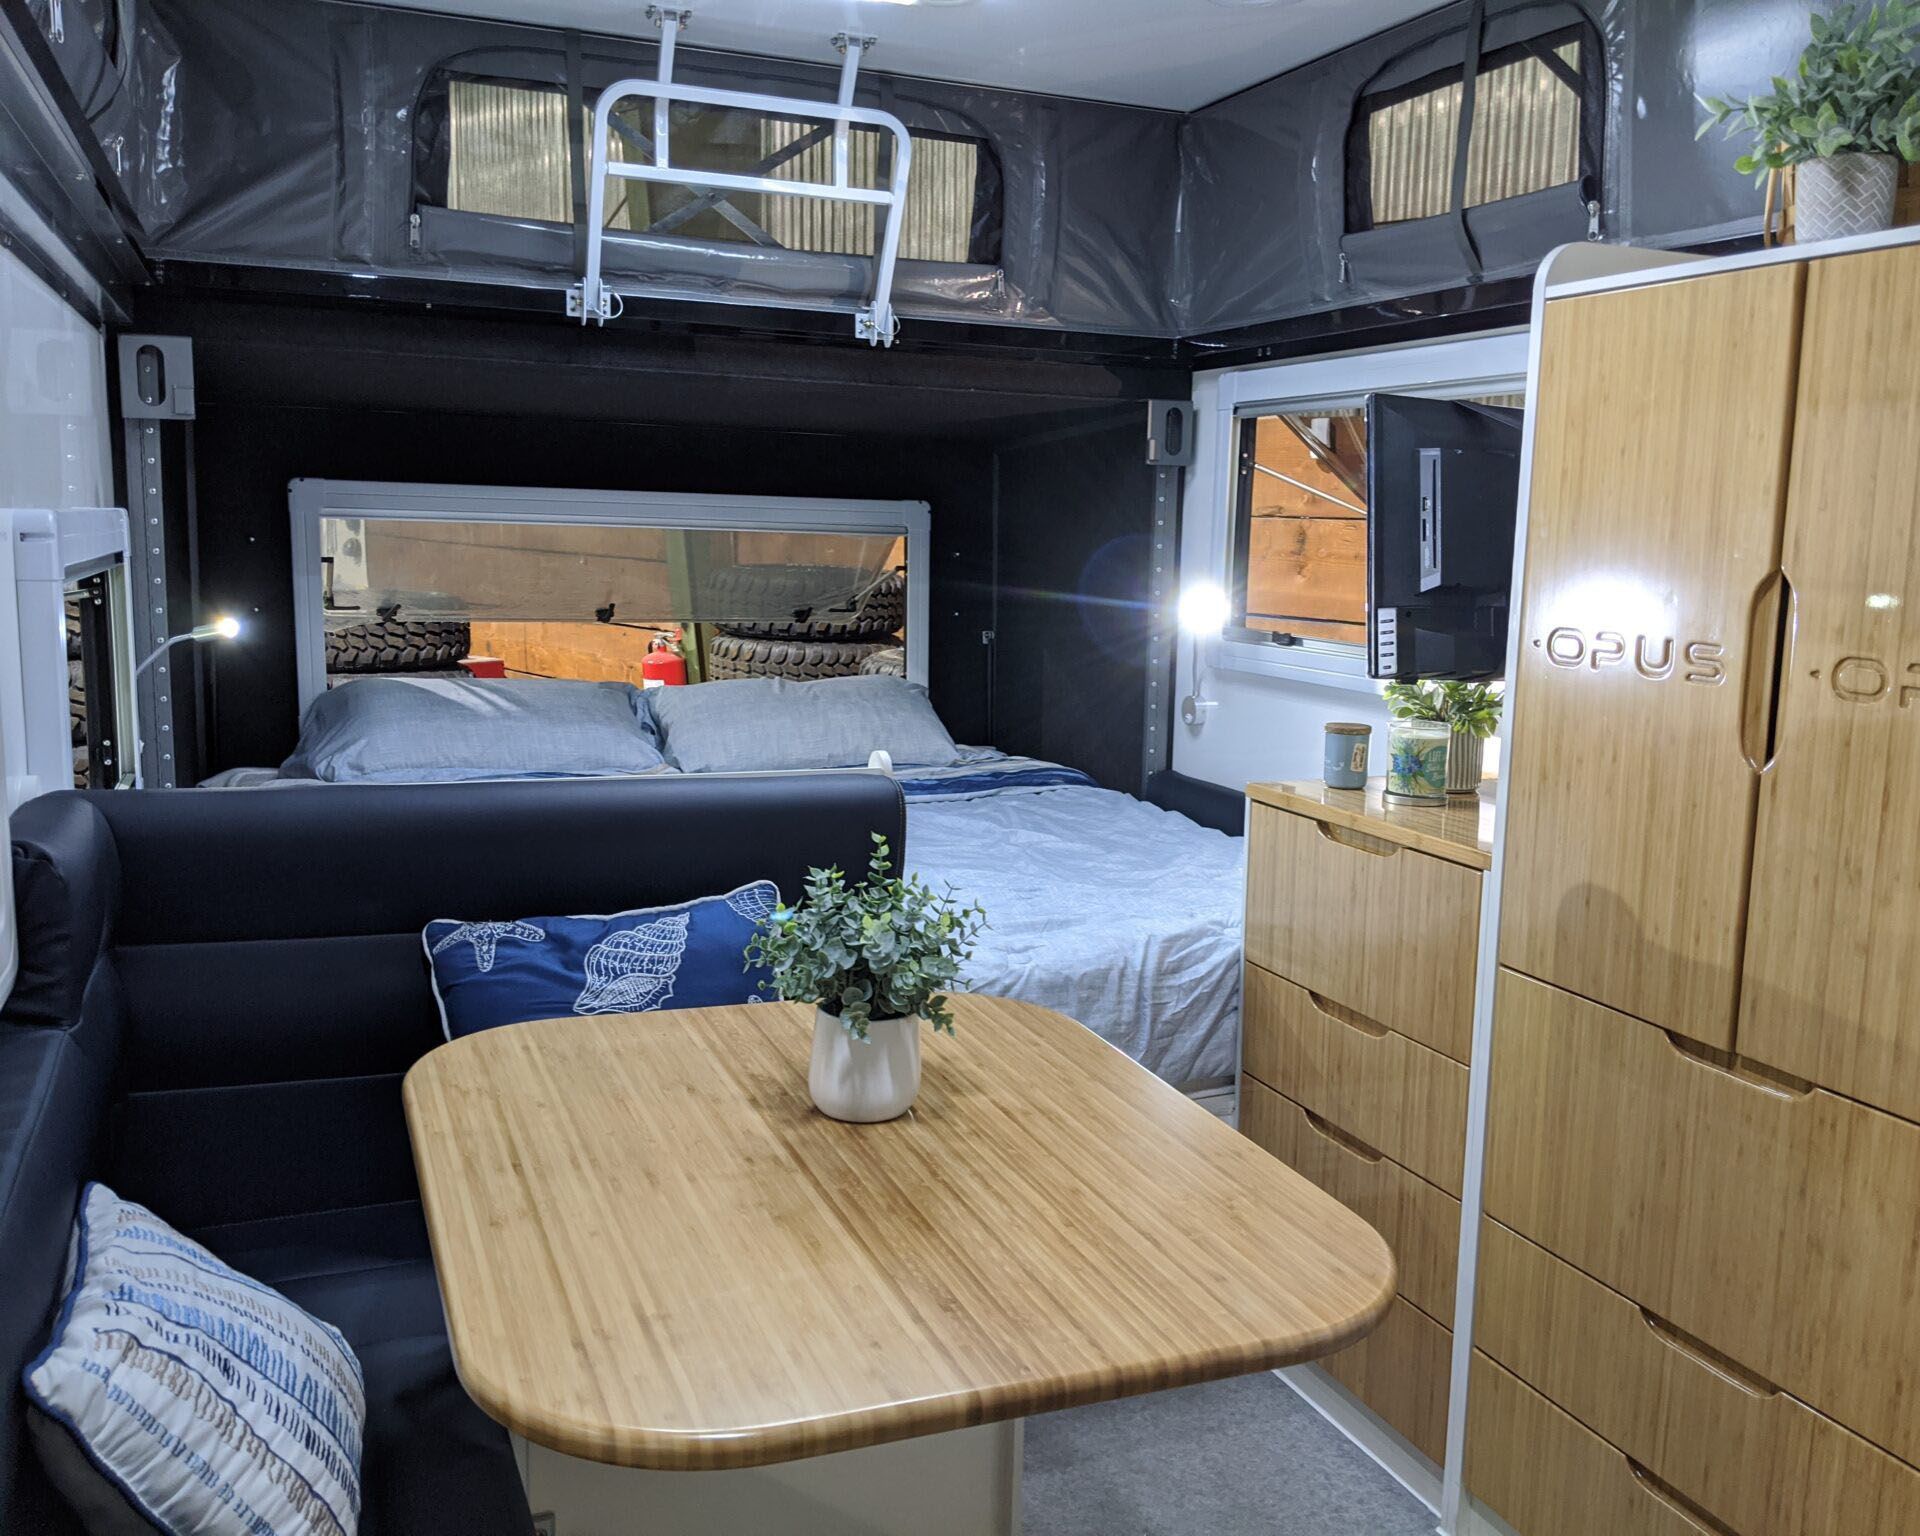 <p>The OP's interior includes a leatherette dining area, shower/toilet combo with hot water availability, a king size bed and twin bunks, and plenty of available storage via a wardrobe and other storage areas. At nearly 5,000 pounds, it'll require a more robust vehicle to tow it but, as <a href="https://gearjunkie.com/camping/opus-op15-off-road-hybrid-camper-trailer">GearJunkie once noted</a>, with this many features, it "may be nicer than your home." Models start at $54,000.</p>